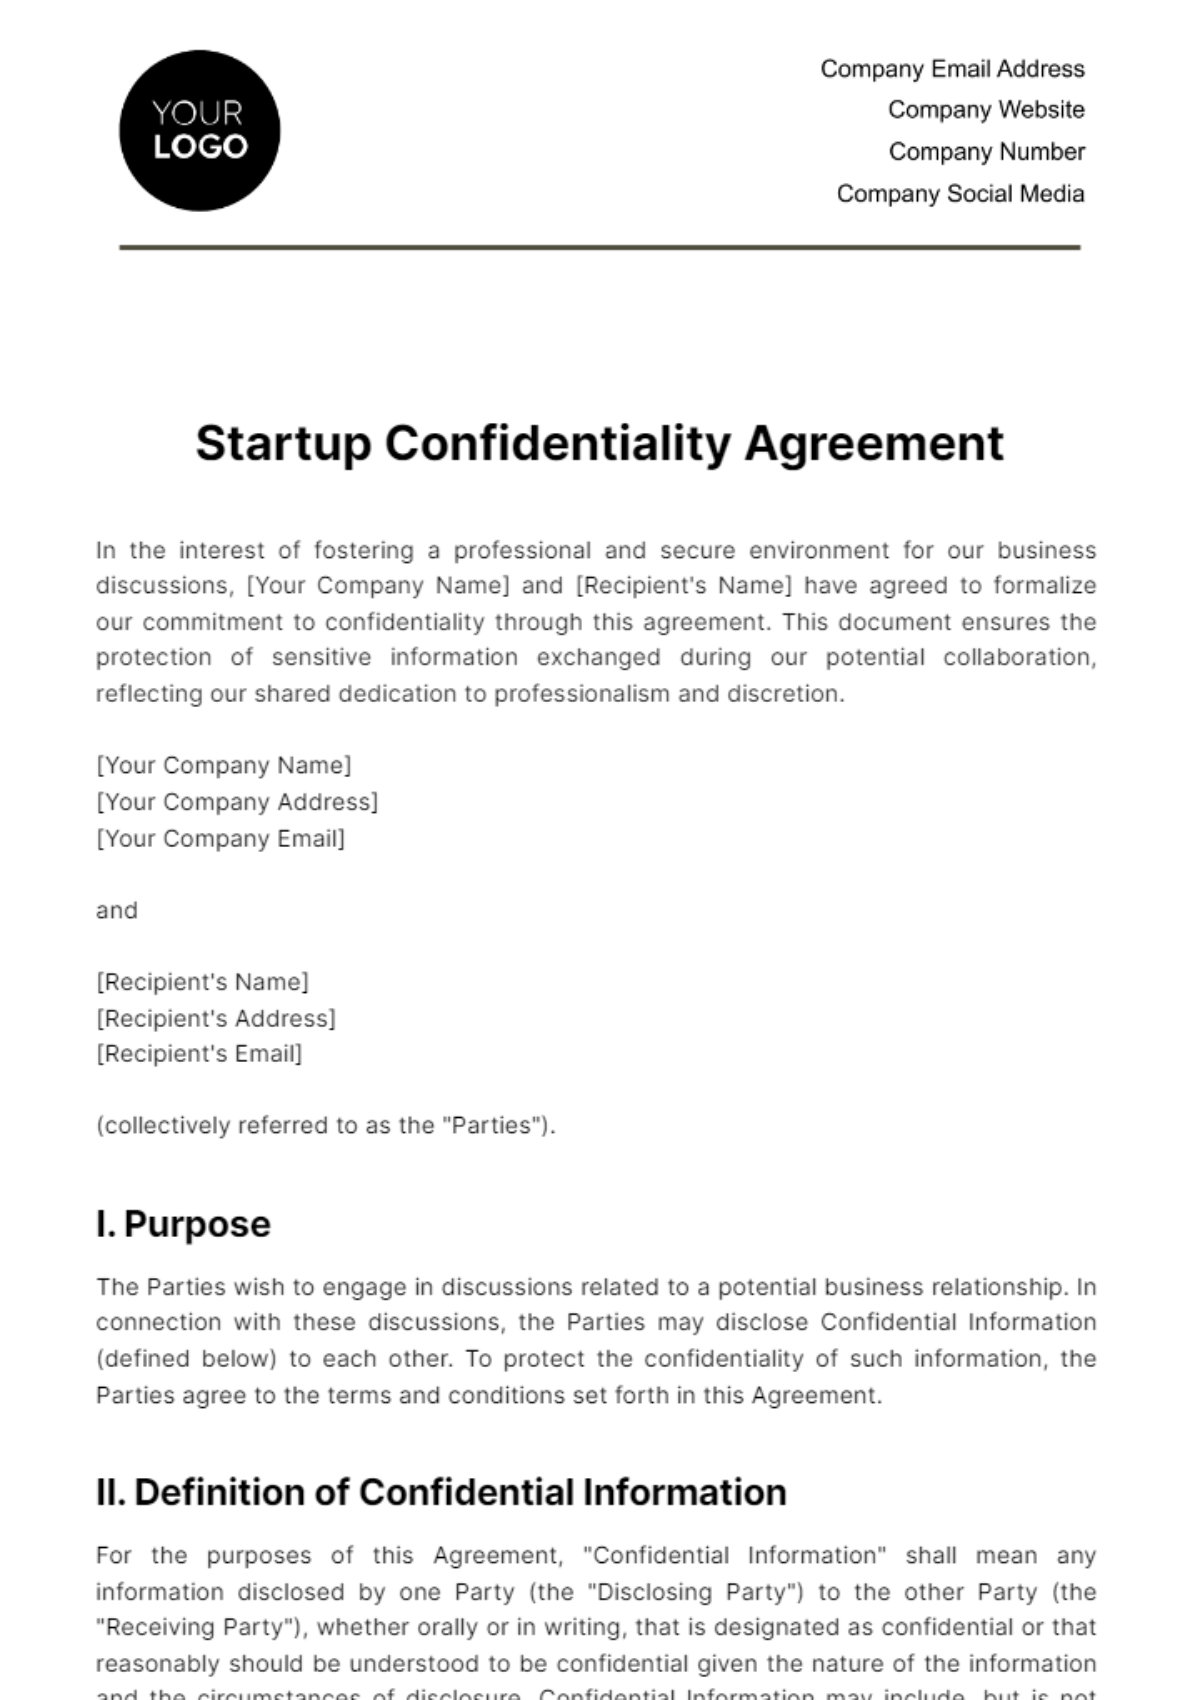 Startup Confidentiality Agreement Template